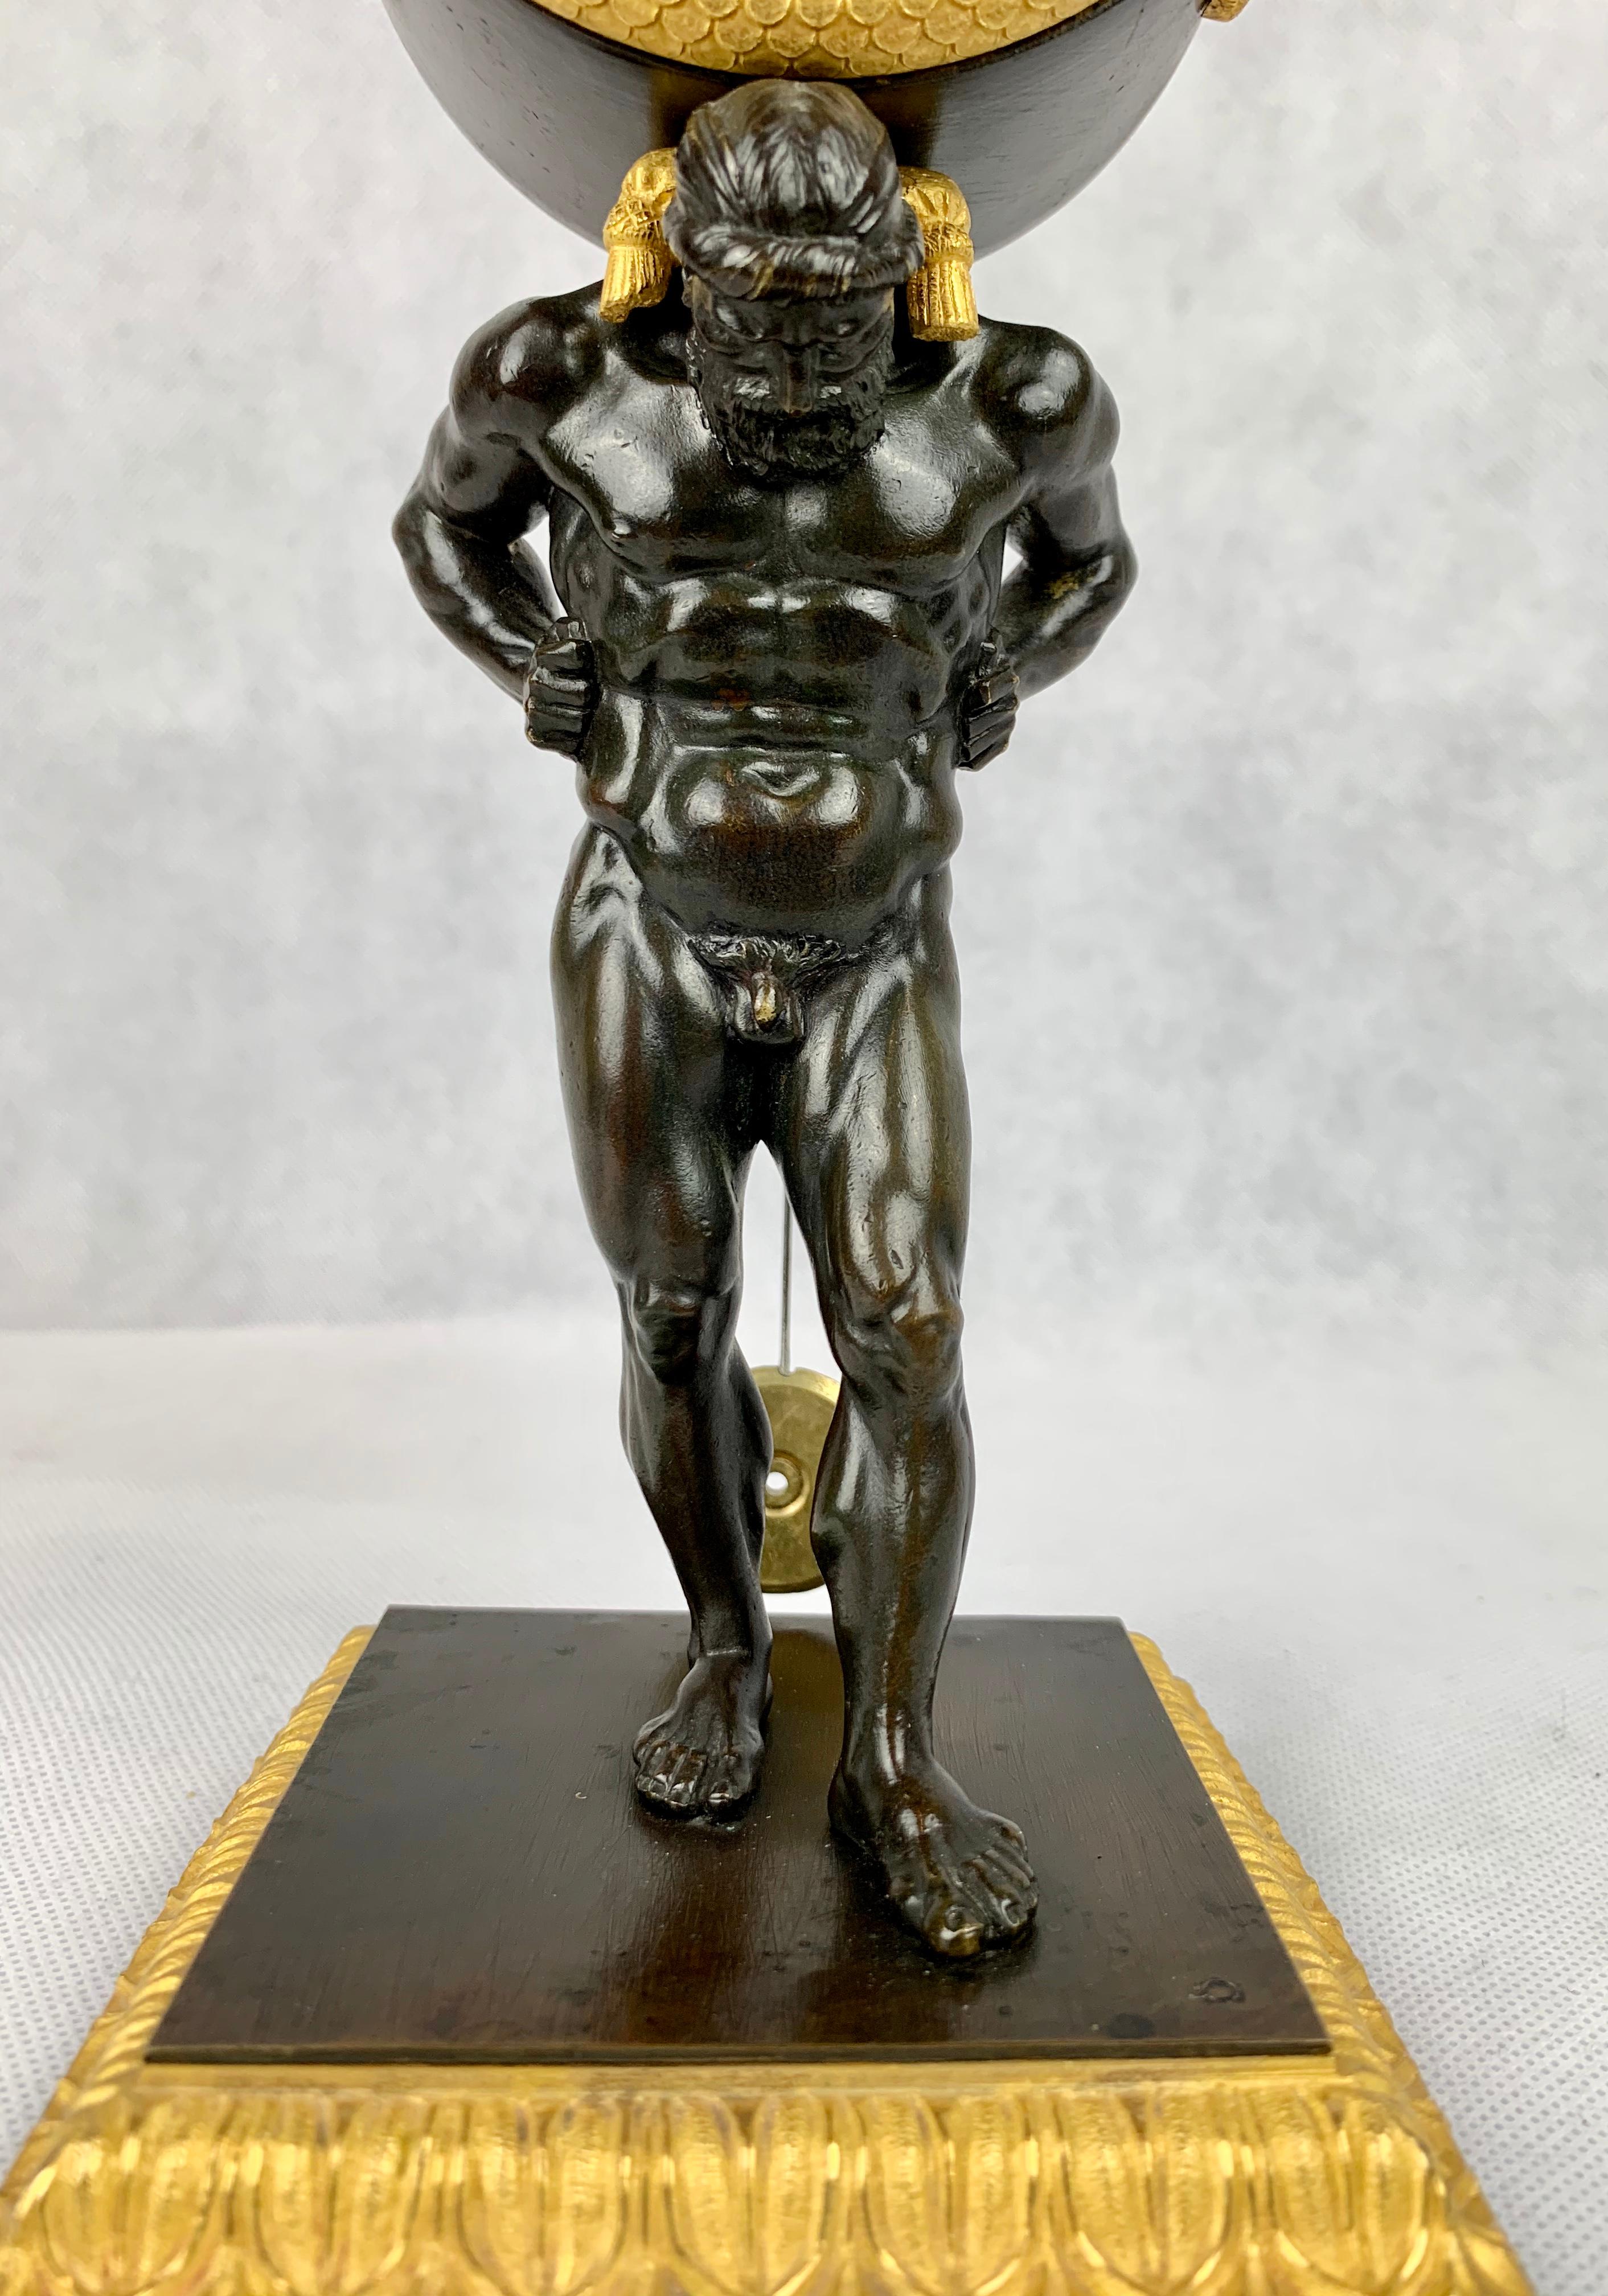 Period French Empire Bronze Doré and Patinated Clock Depicting Atlas with original gilt edged and velvet lined case. Atlas son of Titan, from Greek mythology is holding the clock on his shoulders as if it were the world. Great attention has been